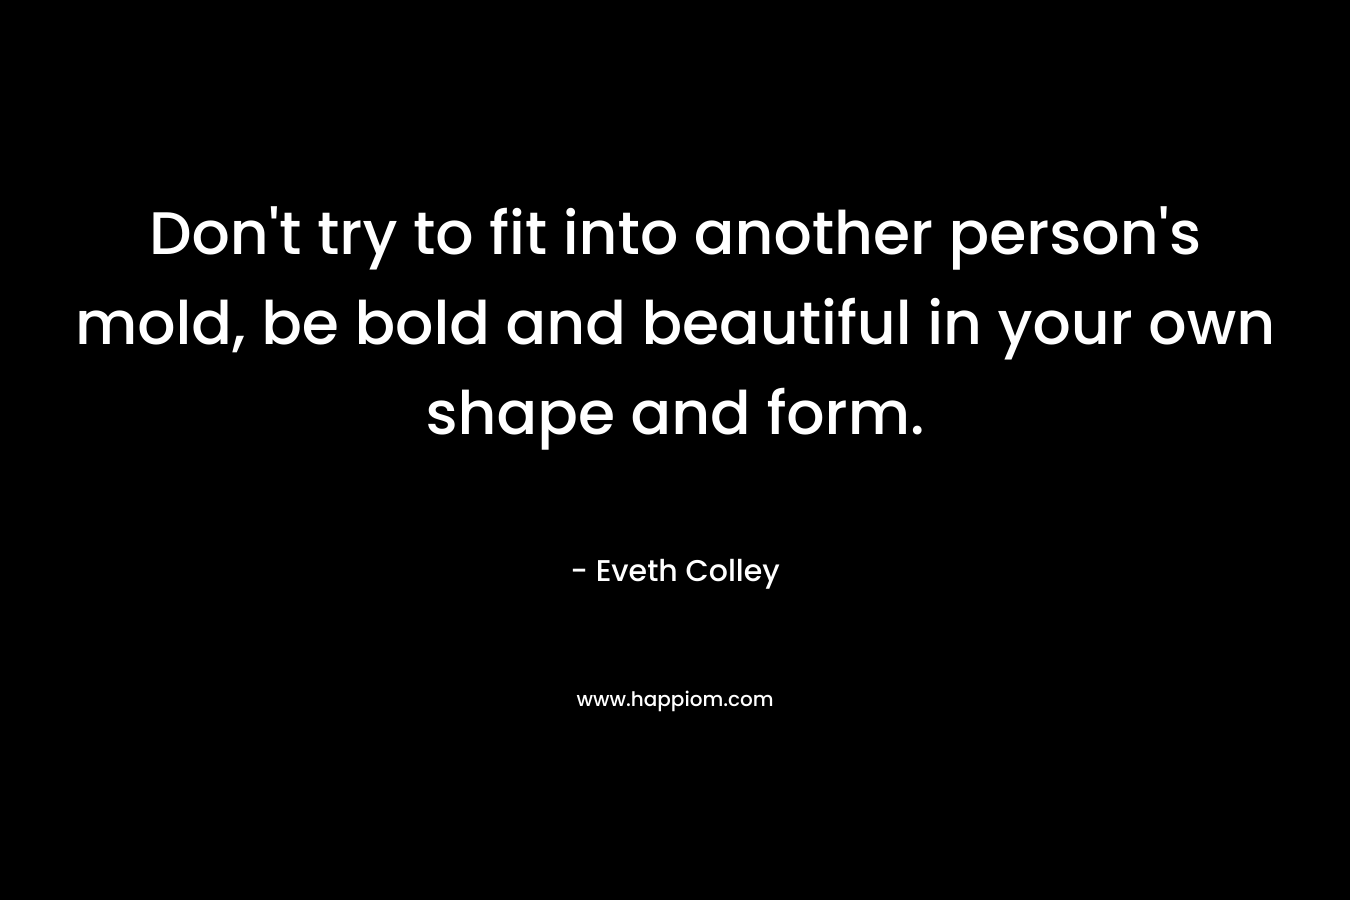 Don’t try to fit into another person’s mold, be bold and beautiful in your own shape and form. – Eveth Colley